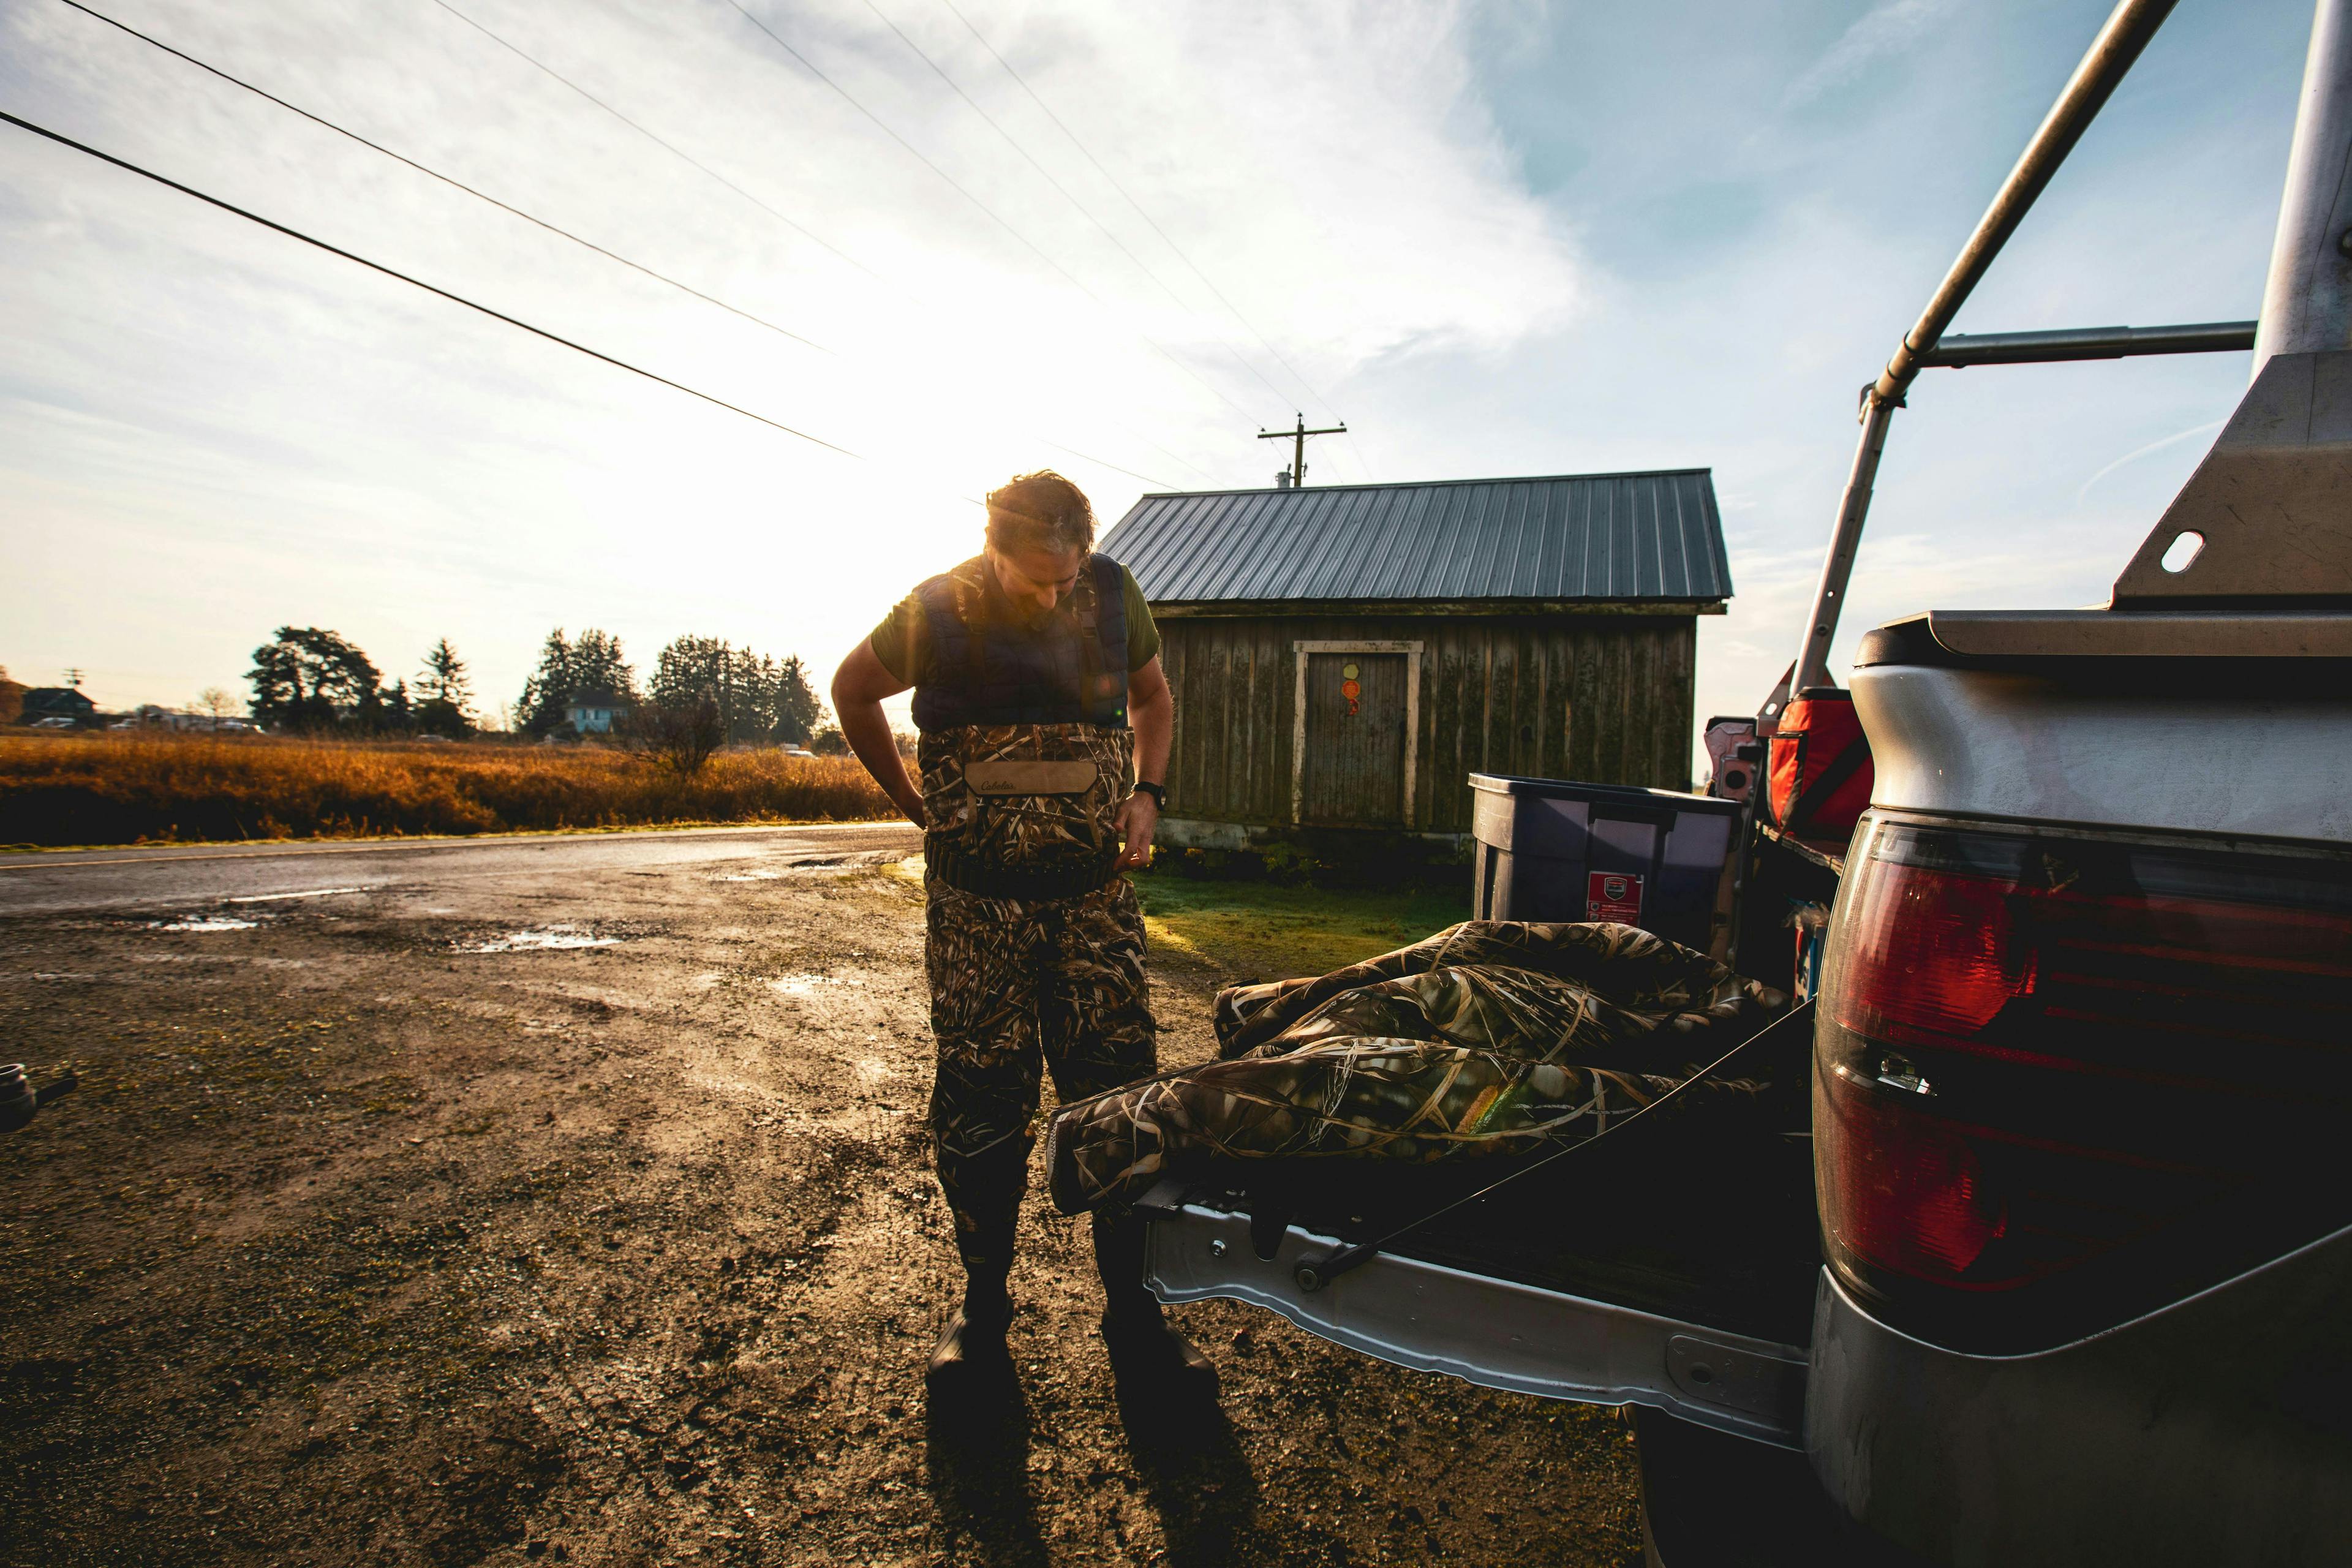 A person putting on hunting gear next to a truck tailgate